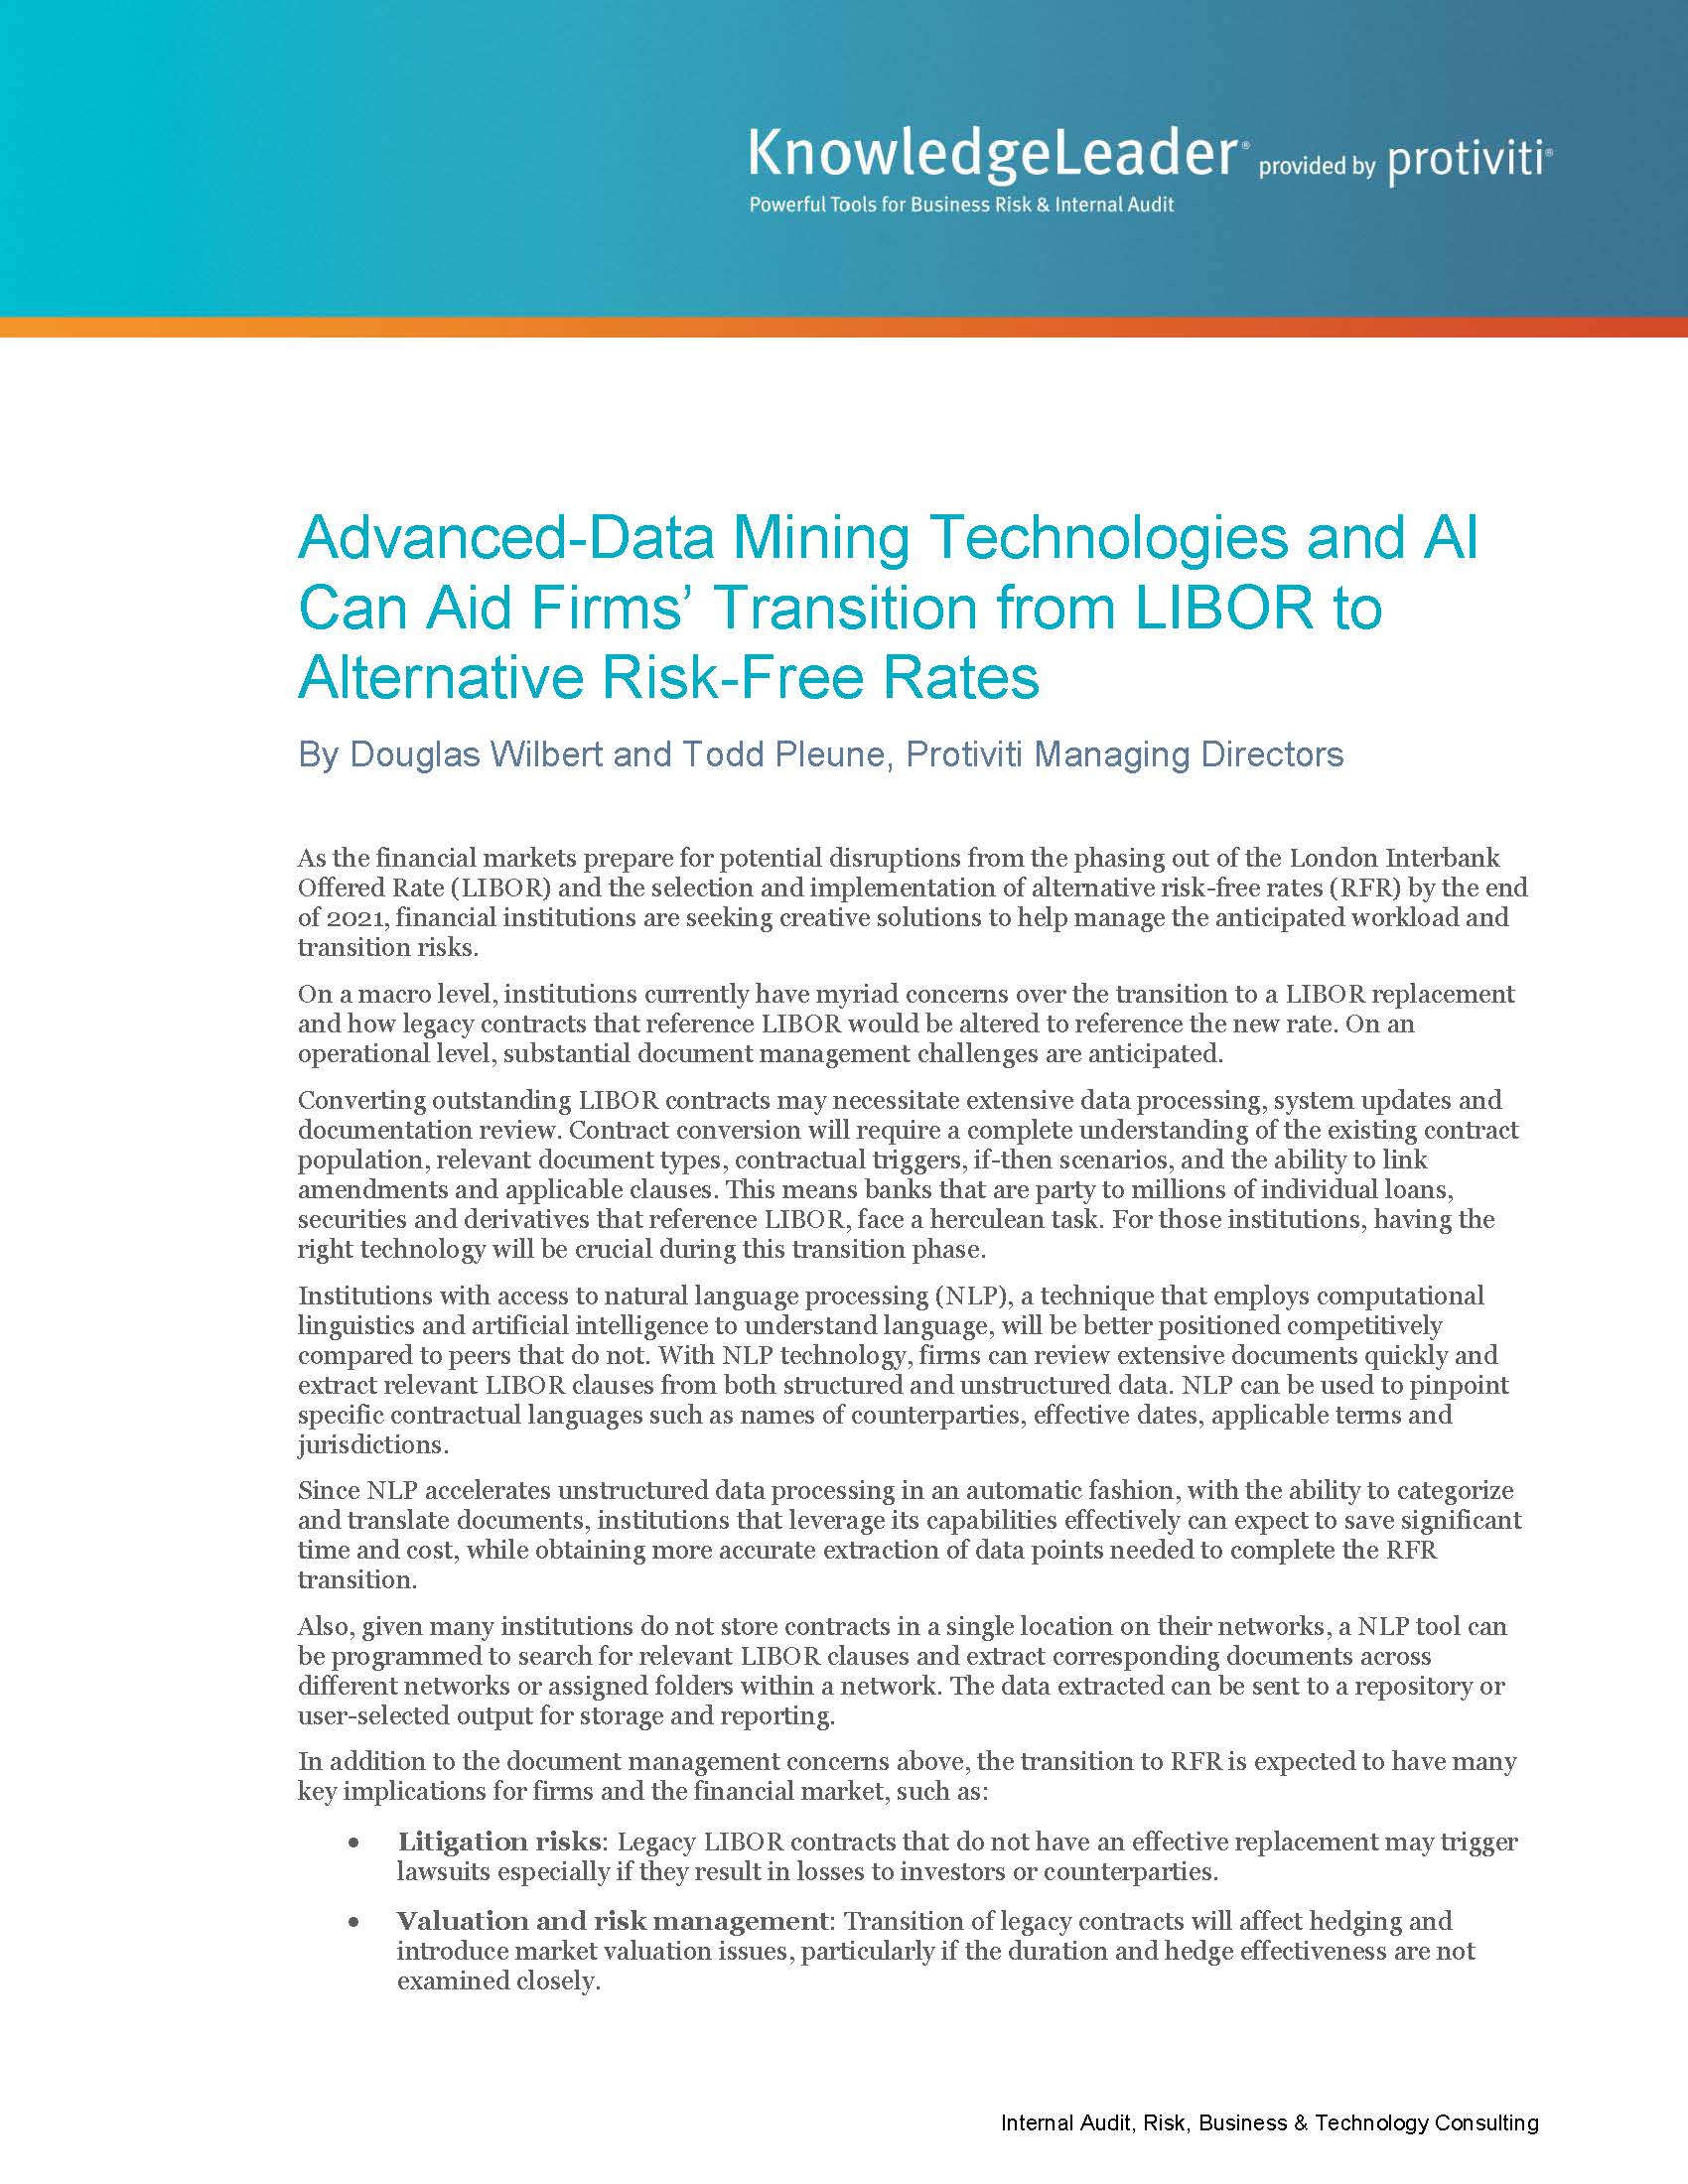 Screenshot of the first page of Advanced Data Mining Technologies and AI Can Aid Firms’ Transition from LIBOR to Alternative Risk-Free Rates